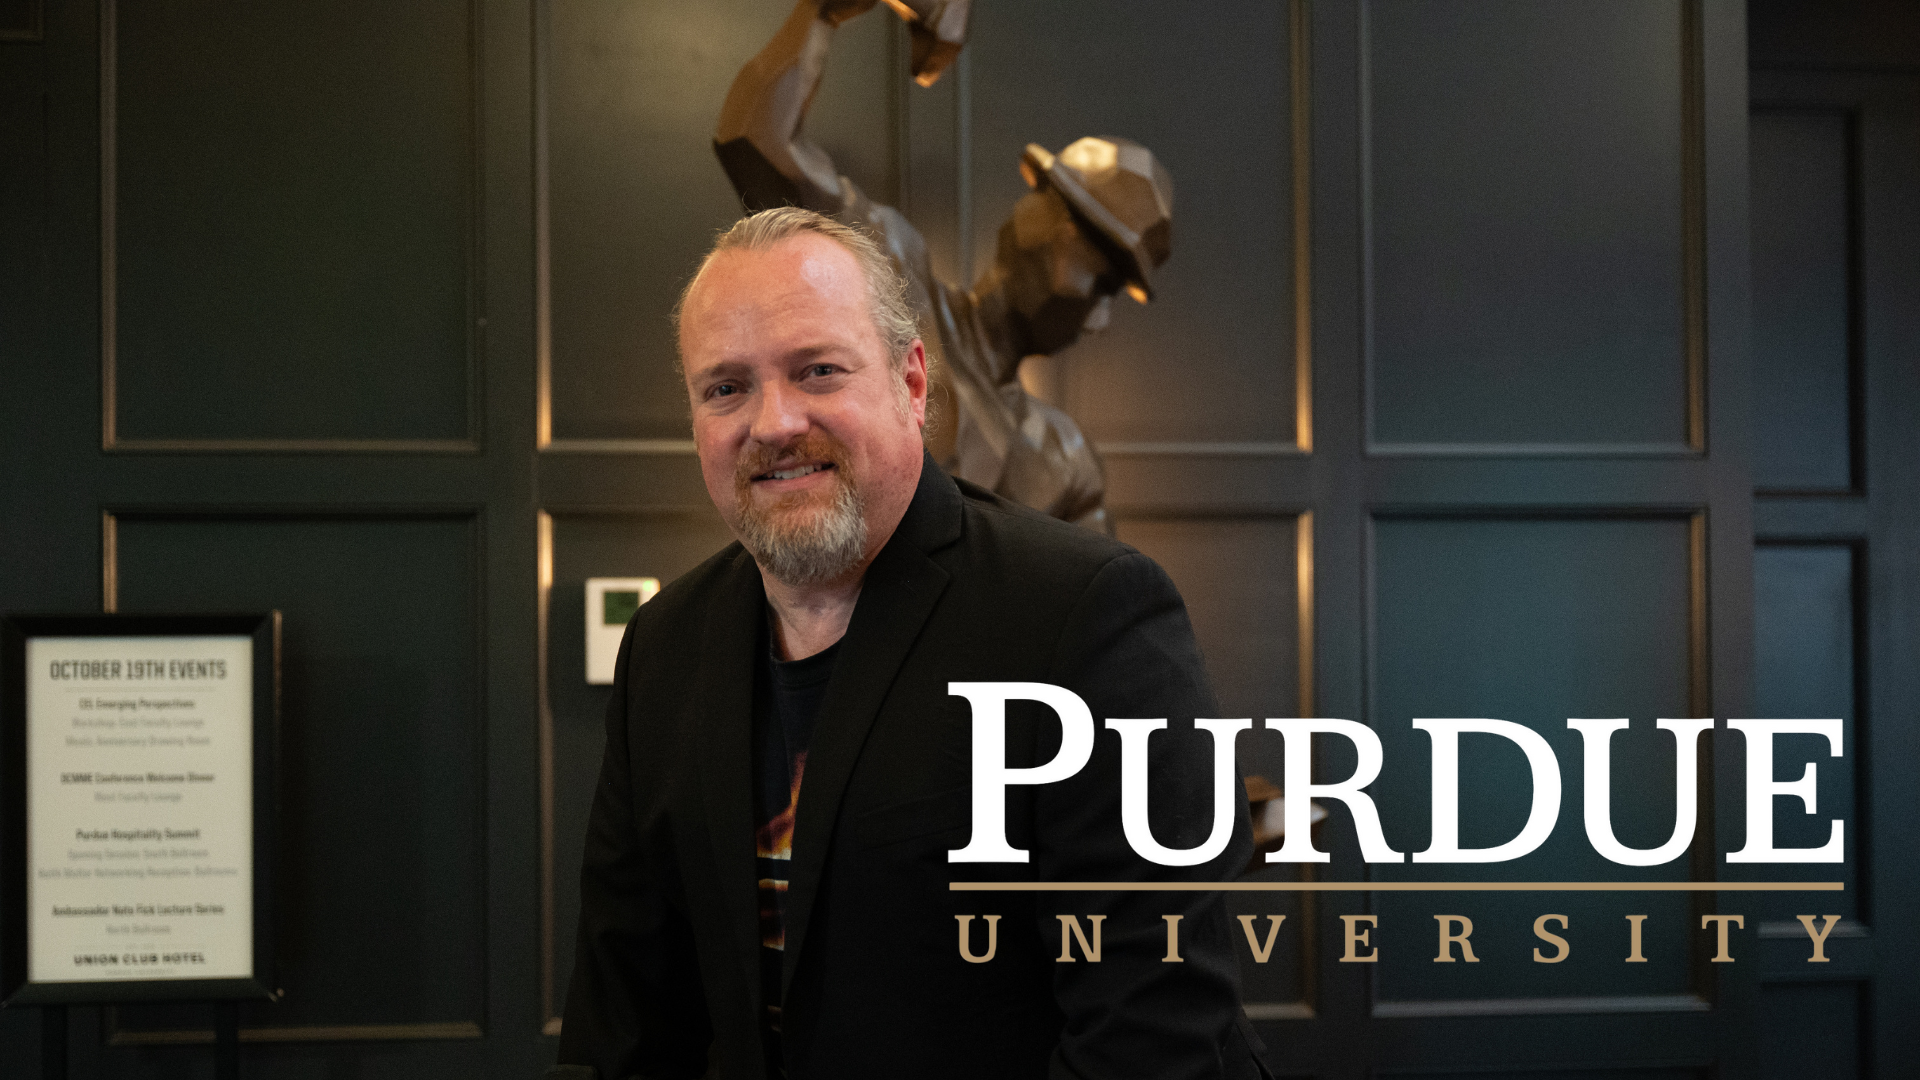 Featured image for “Acquired Disability Inspires Purdue Hospitality Alumnus to Improve Accessibility Training in Hotels”